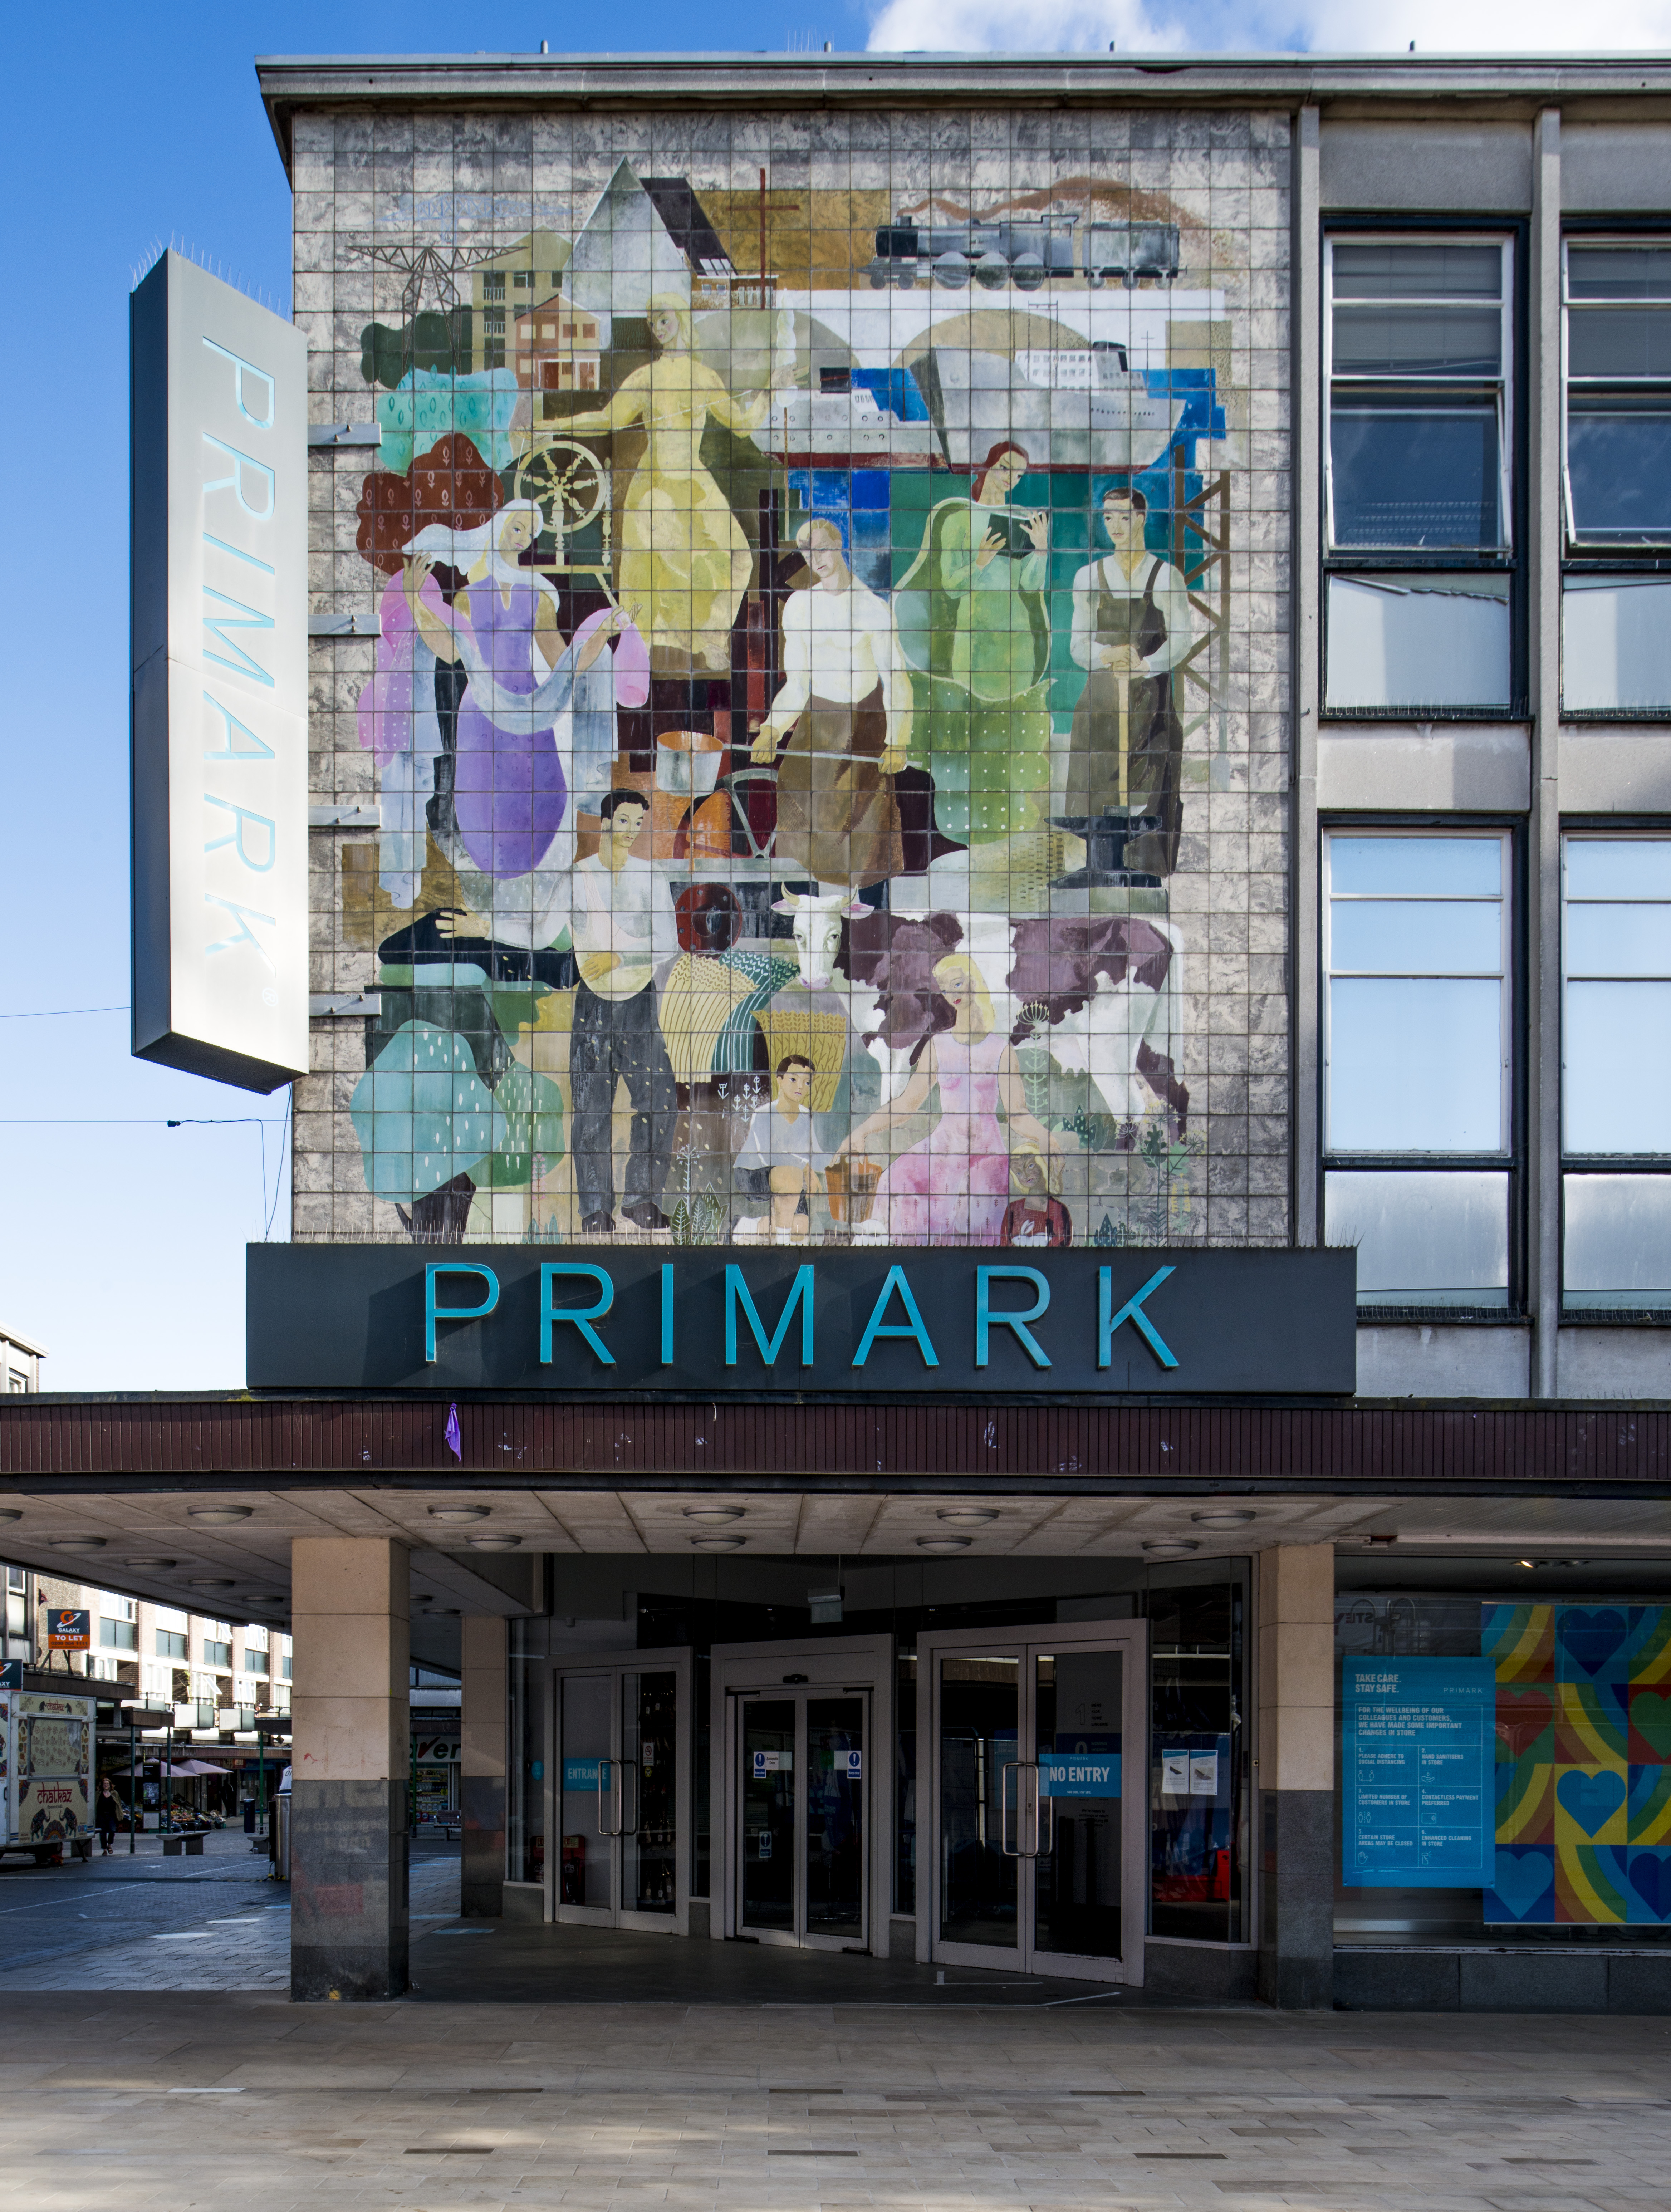 Co-operative House in Stevenage, which is now a Primark store, opened in 1958 with its colourful tiled mural by the artist Gyula Bajo. (Historic England/ Elain Harwood/ PA)